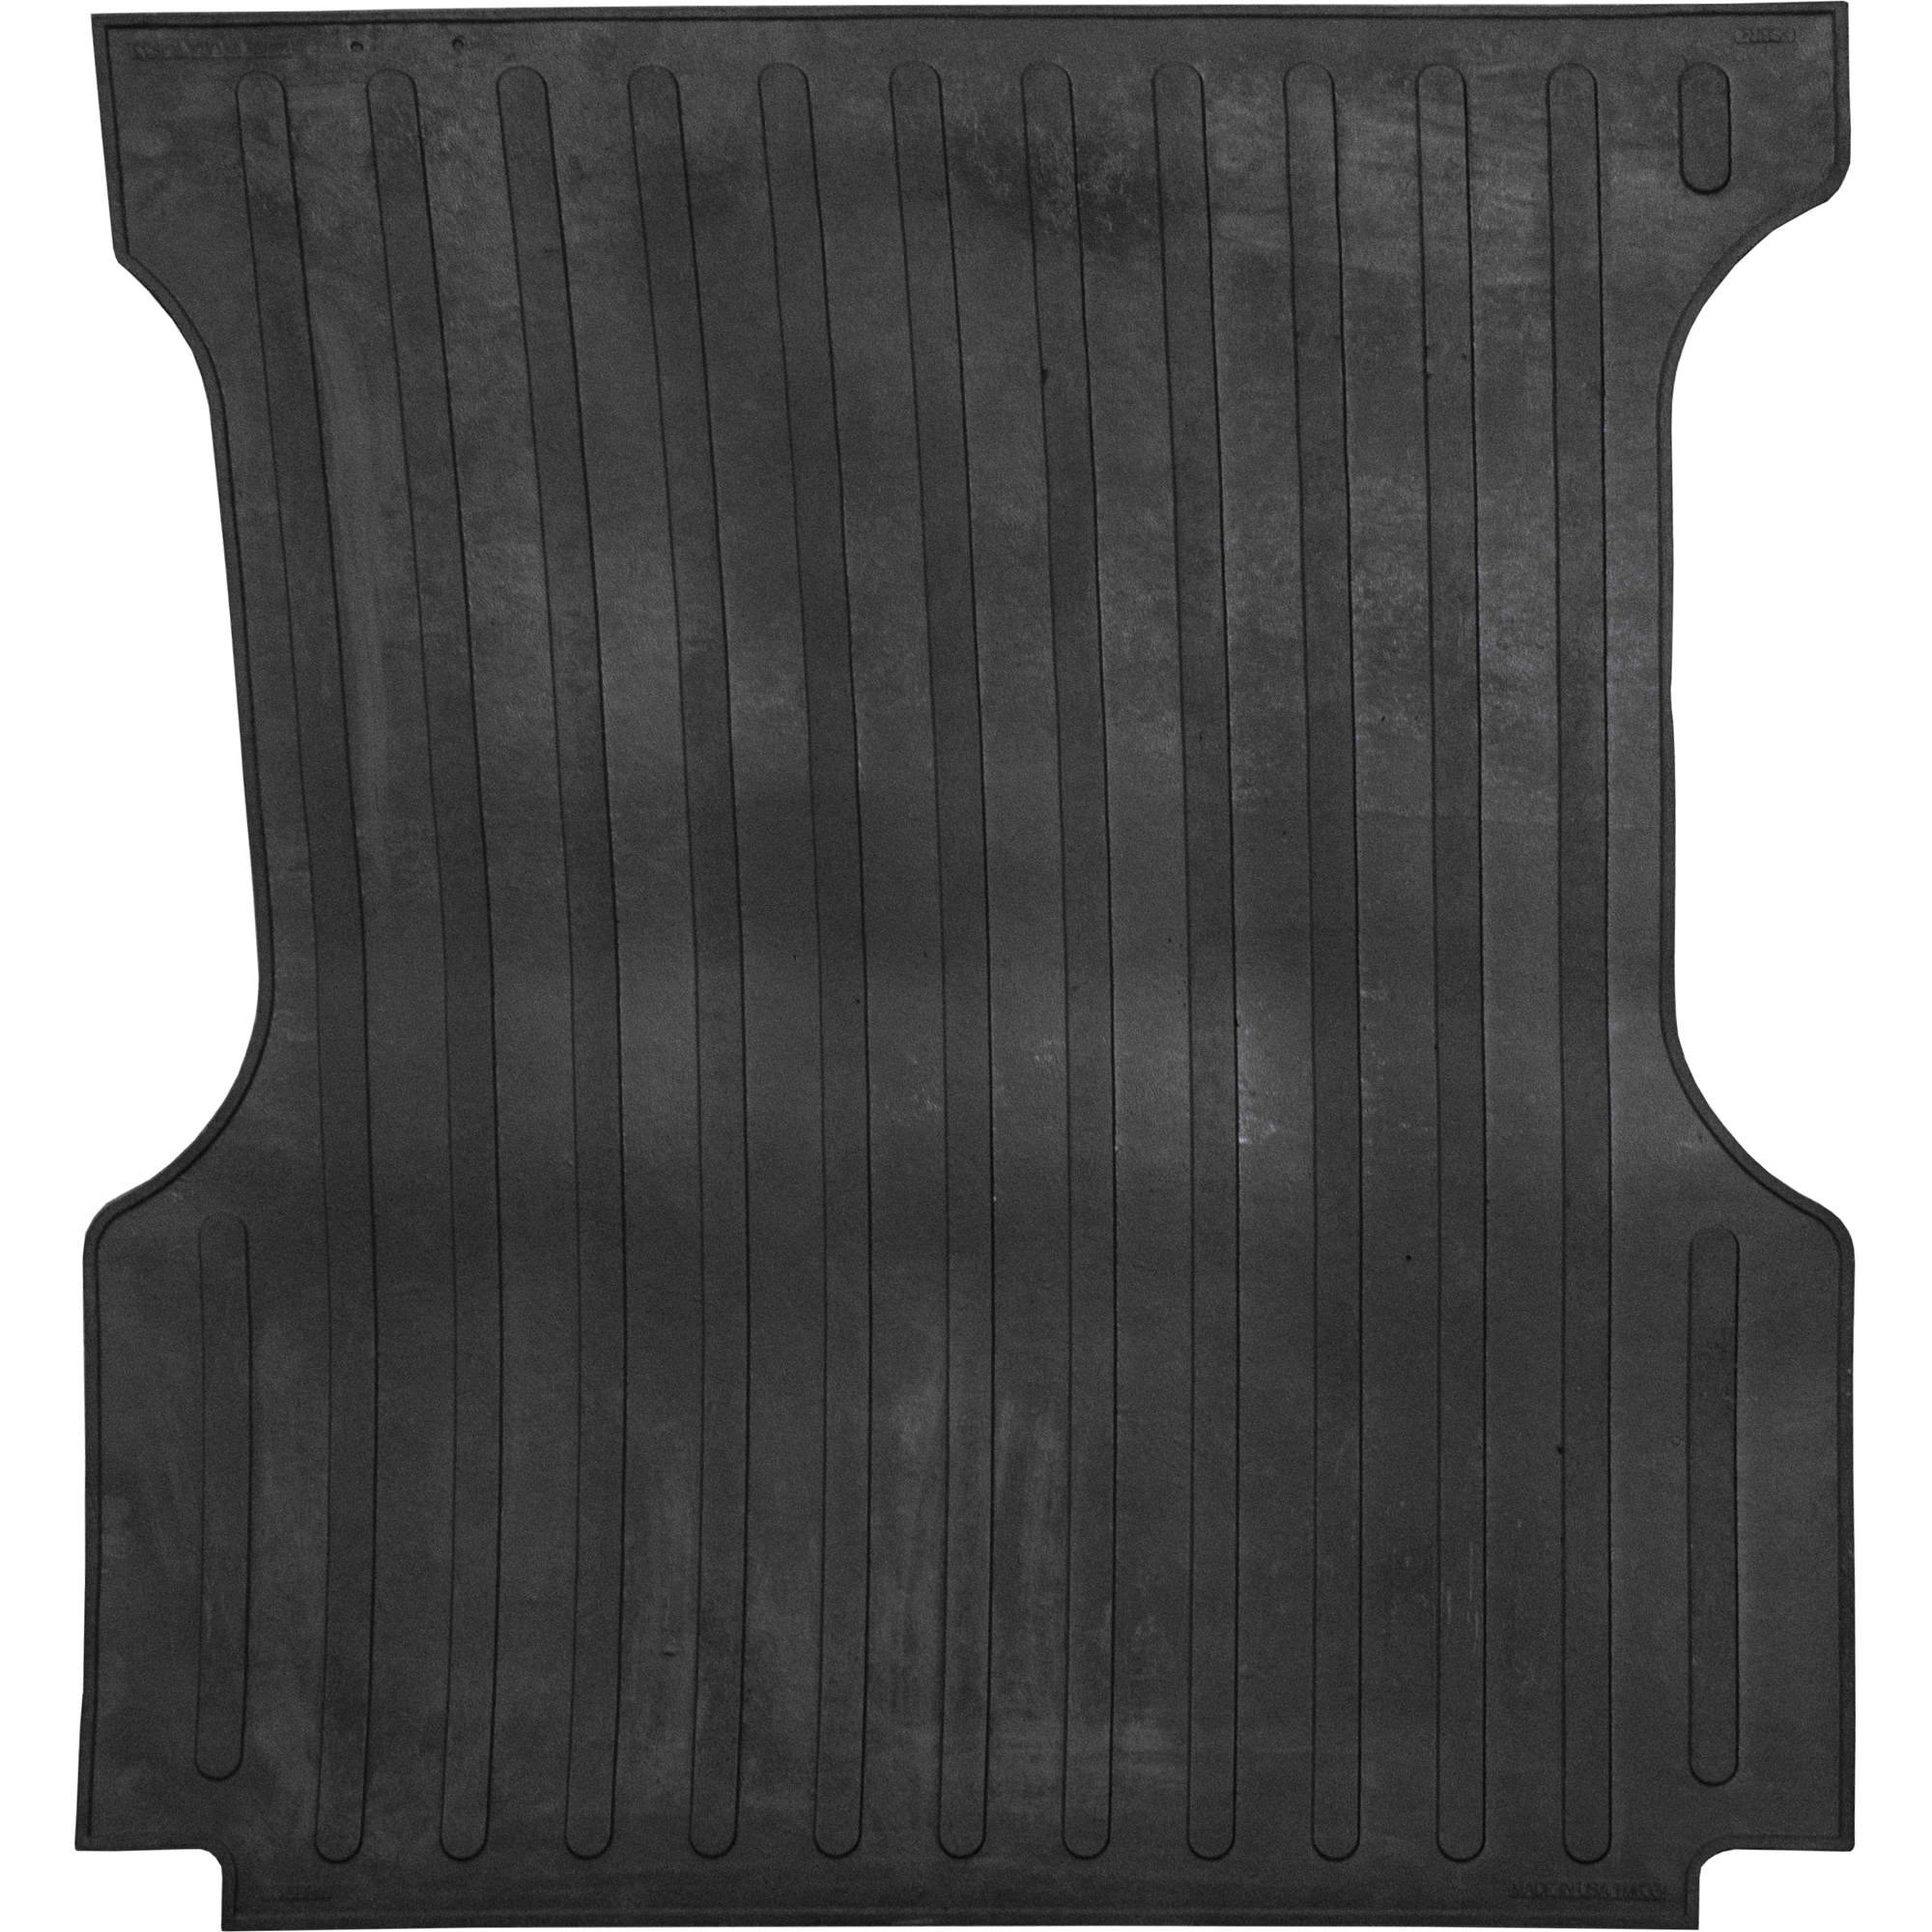 Boomerang Rubber, Chevy/GMC/Sierra 1500-3500 Bed Mat, Standard Bed, 6.5ft. Long, Primary Color Black, Model TM663BAGGED